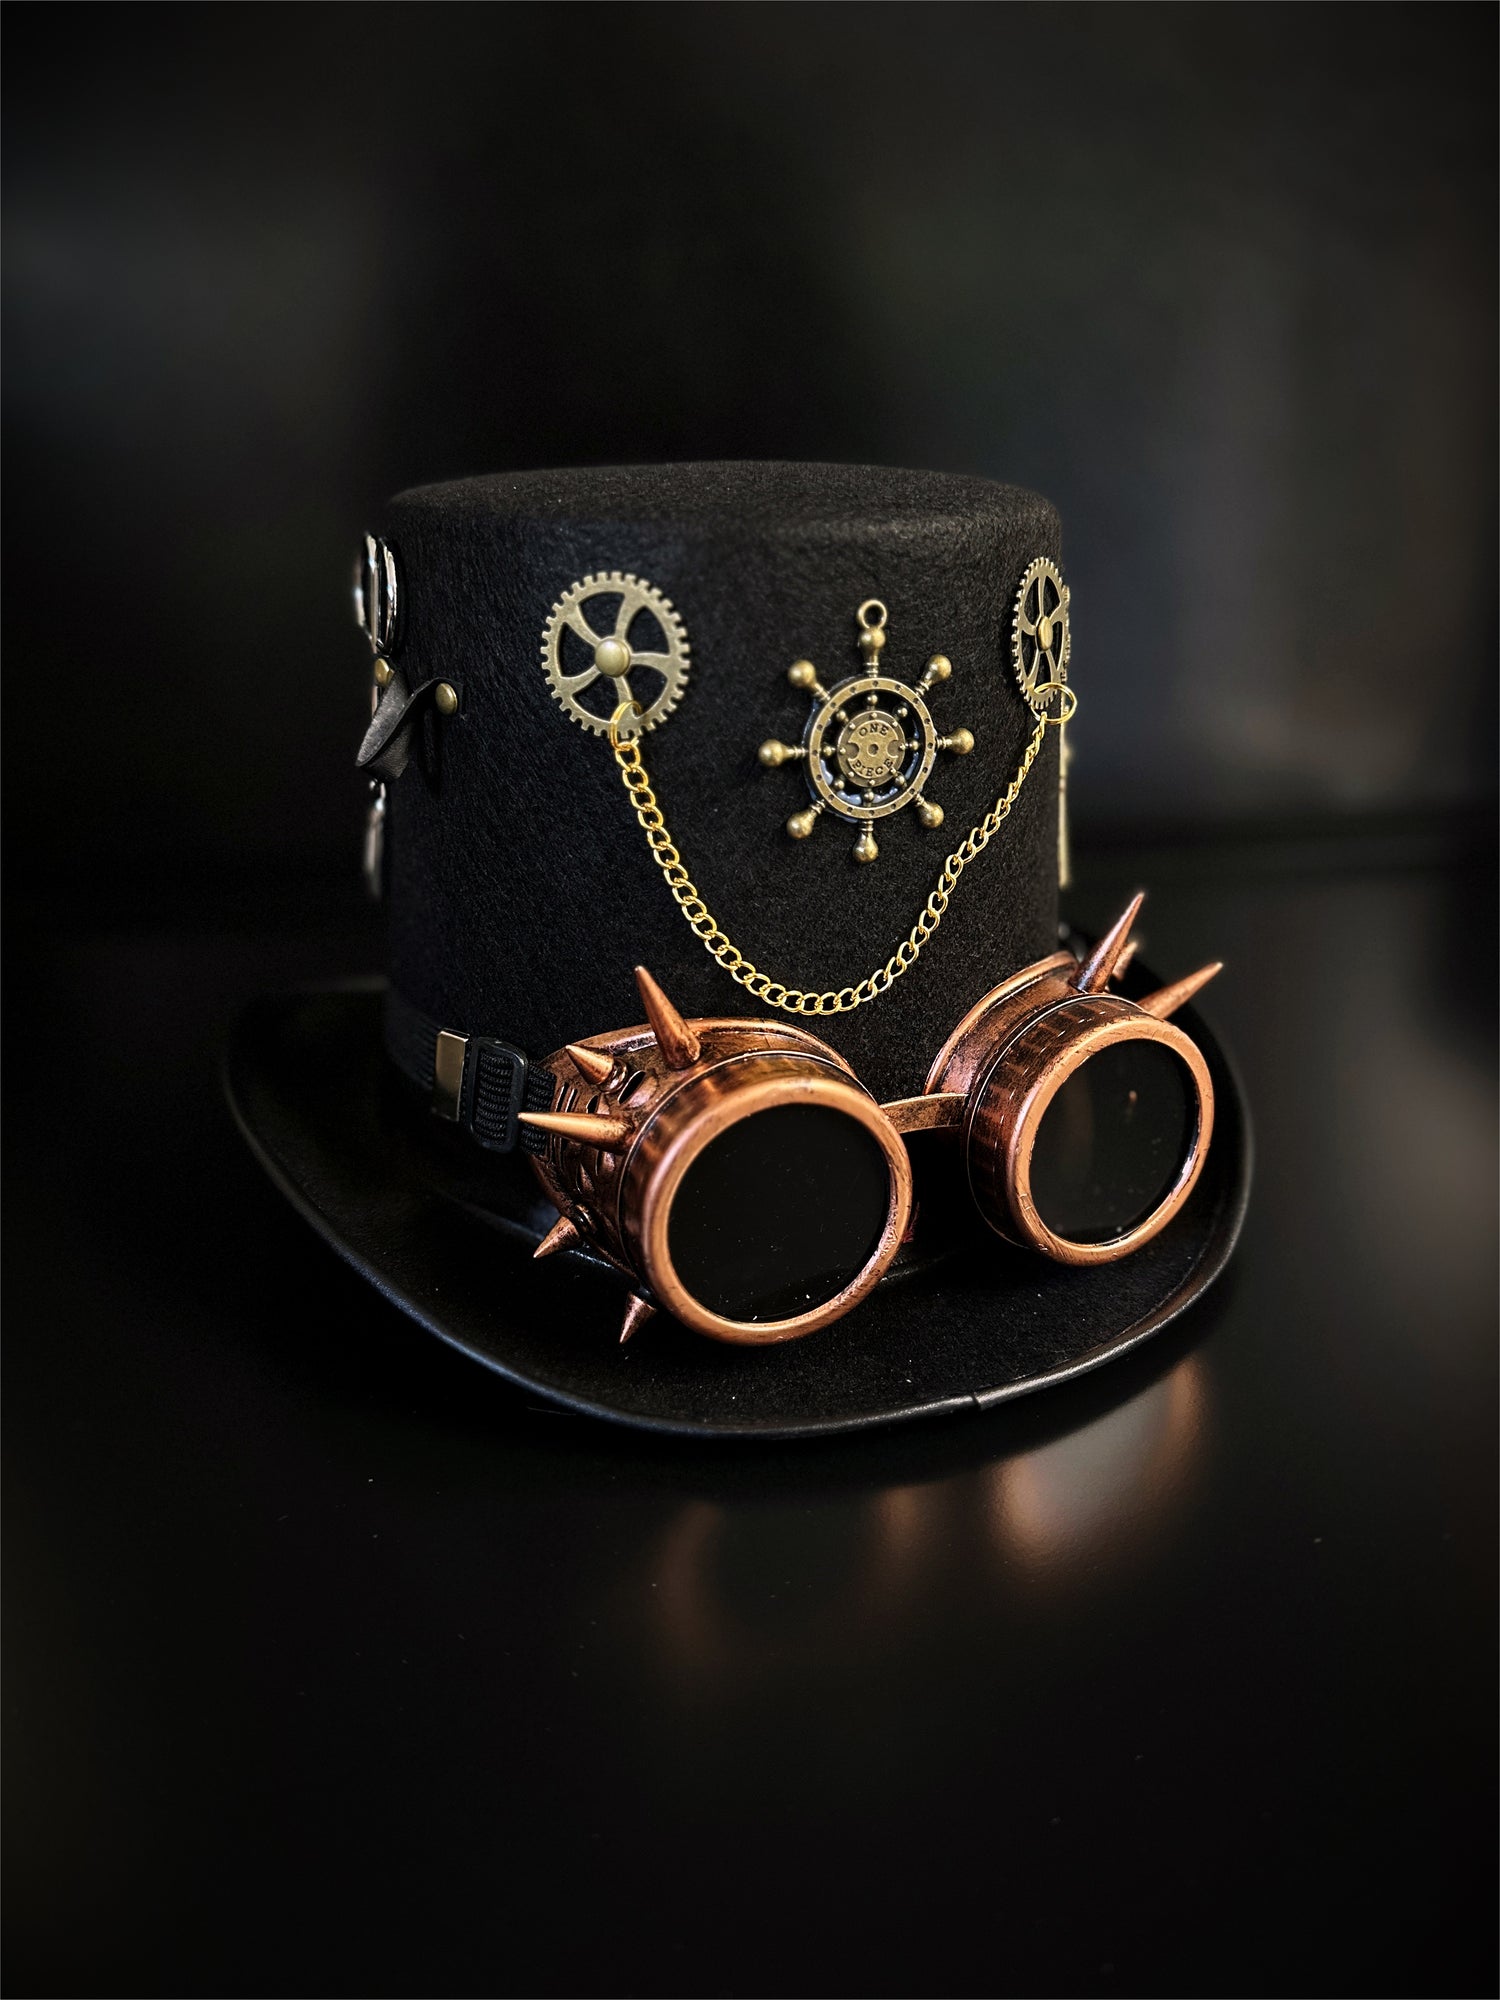 Black steampunk hat with copper spiked goggles and steampunk motifs.